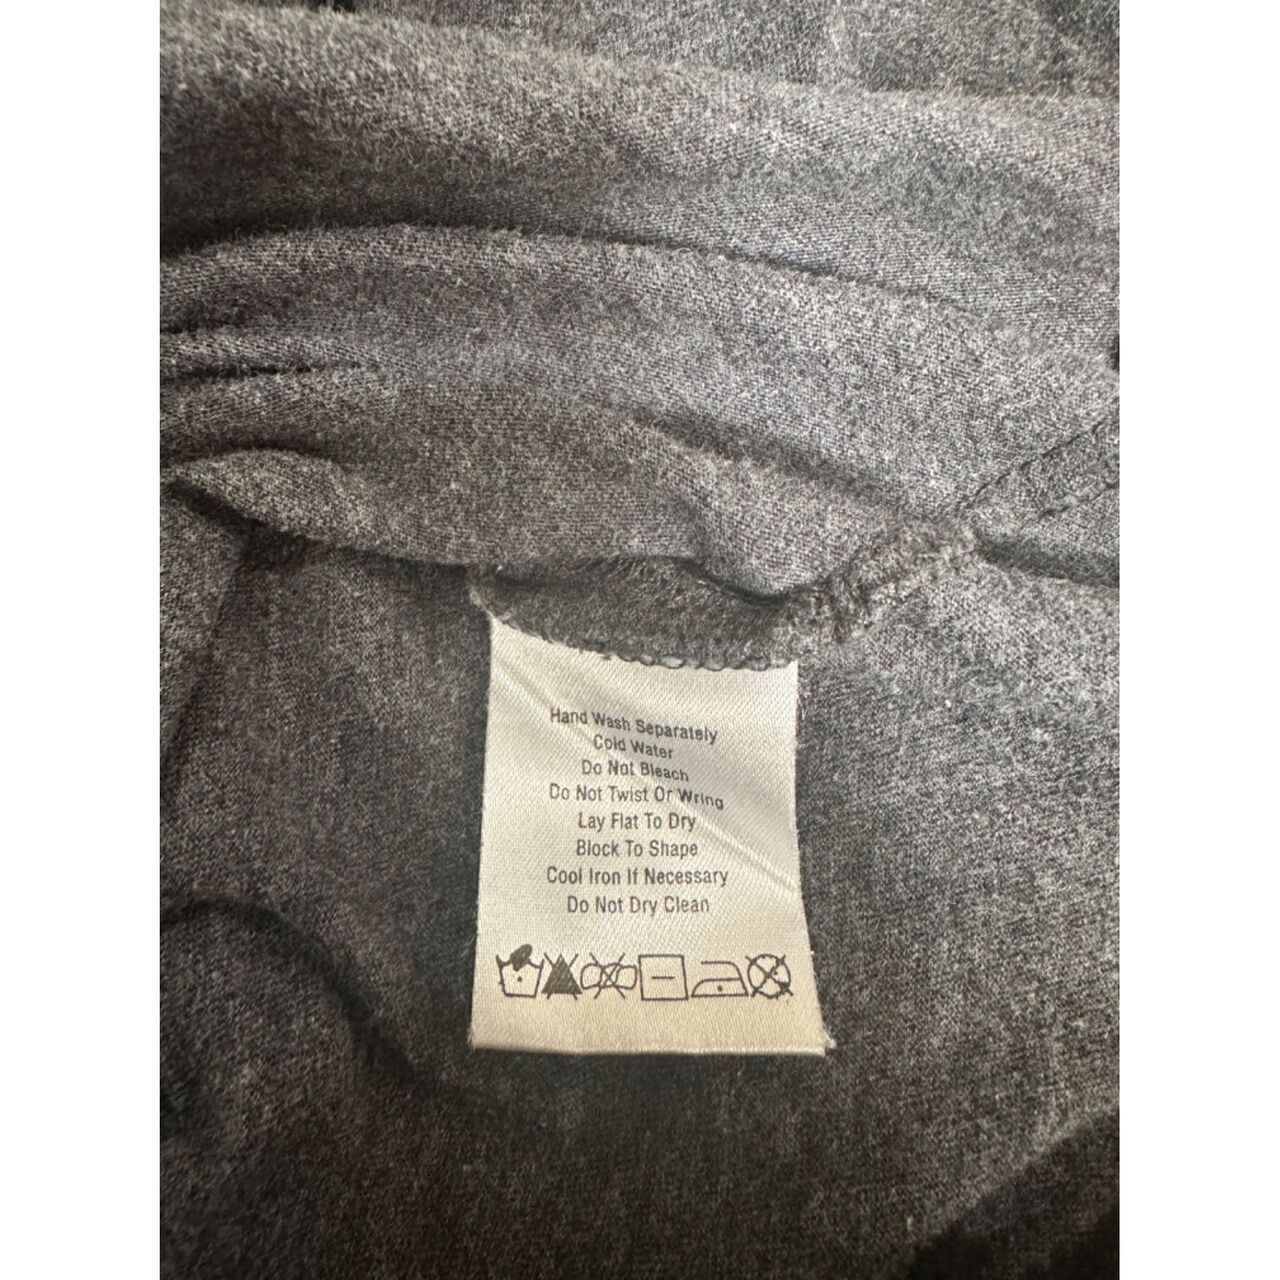 Dkny Jeans Grey Cotton Top